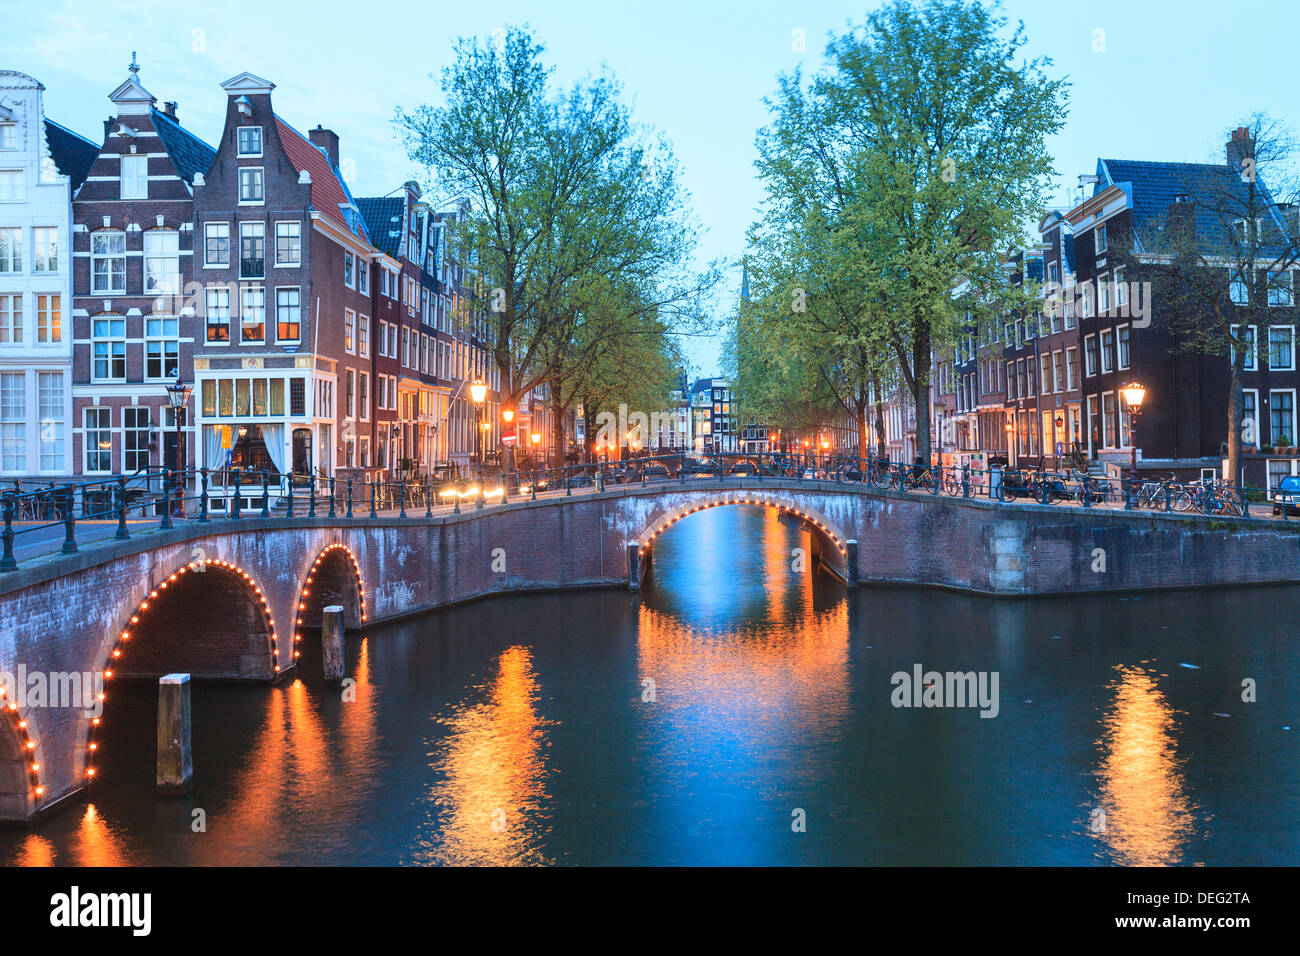 Keizersgracht and Leidsegracht canals at dusk, Amsterdam, Netherlands, Europe Stock Photo